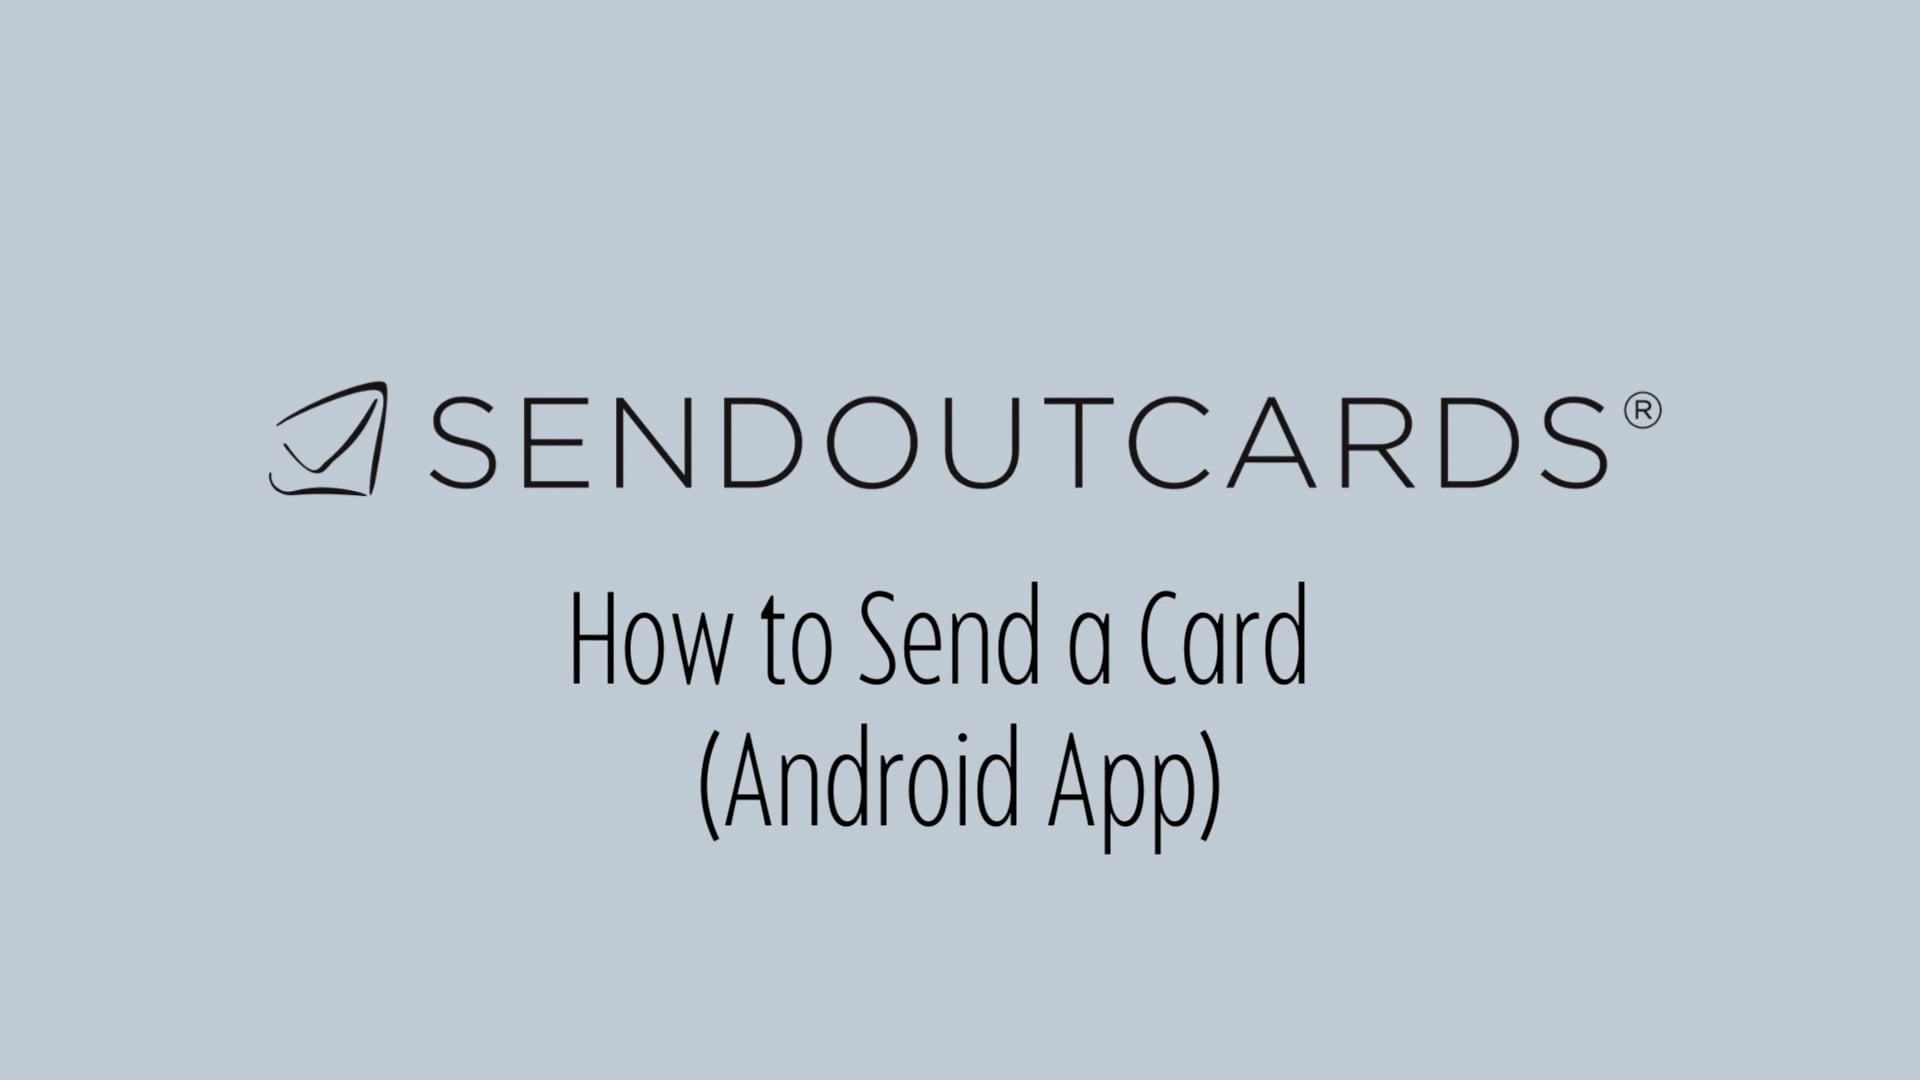 Watch this video - How to Send a Card on Android App